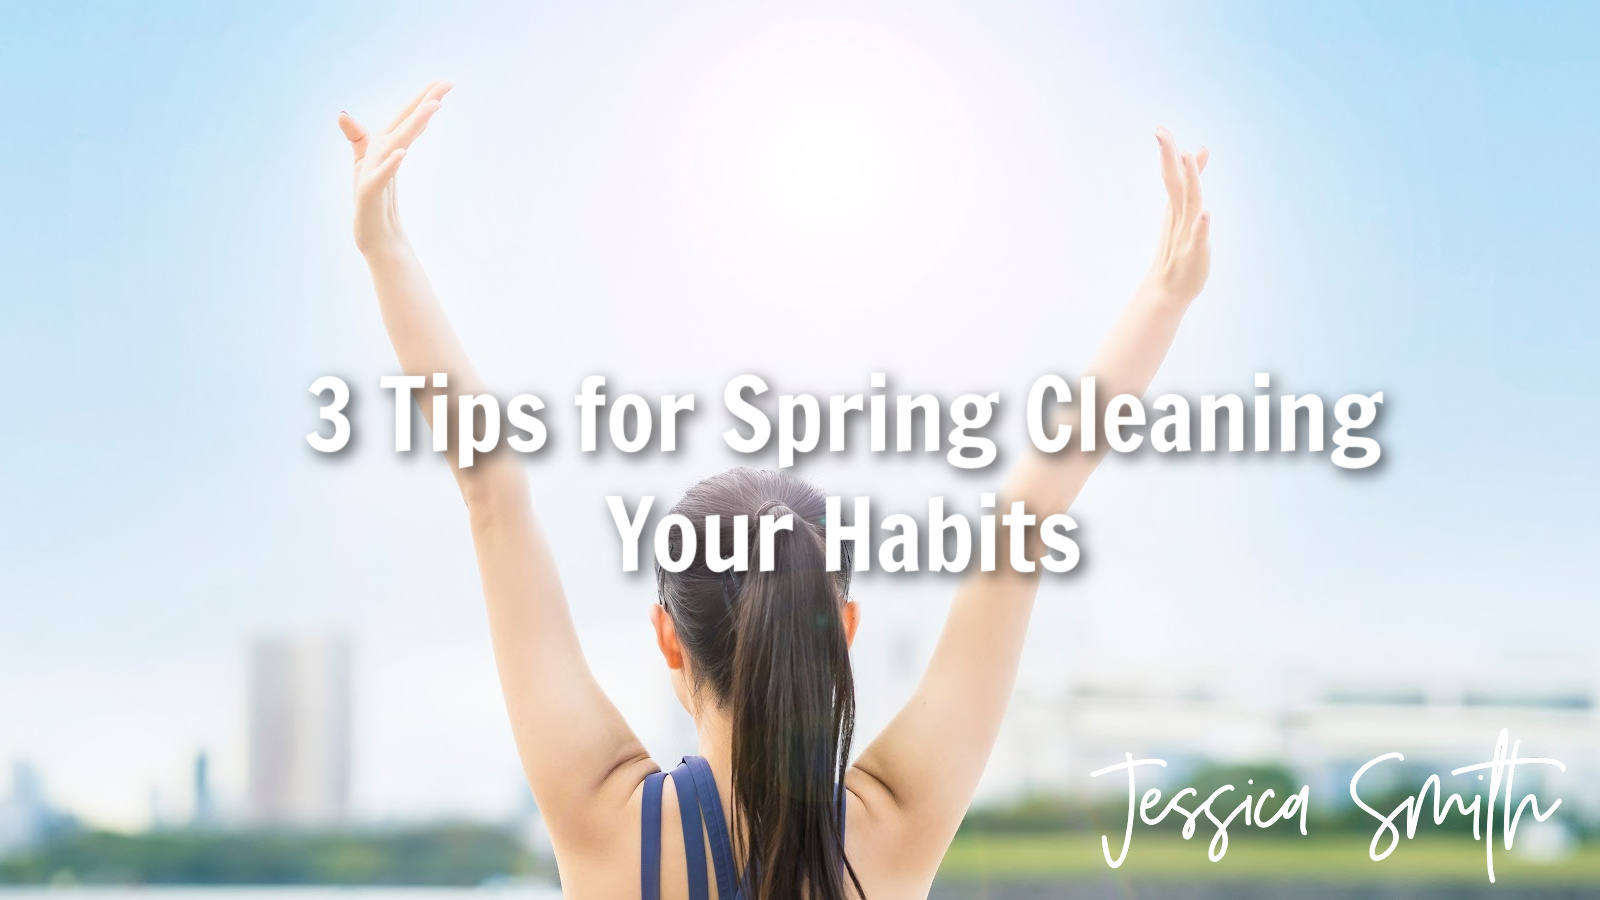 3 Tips for Spring Cleaning Your Habits